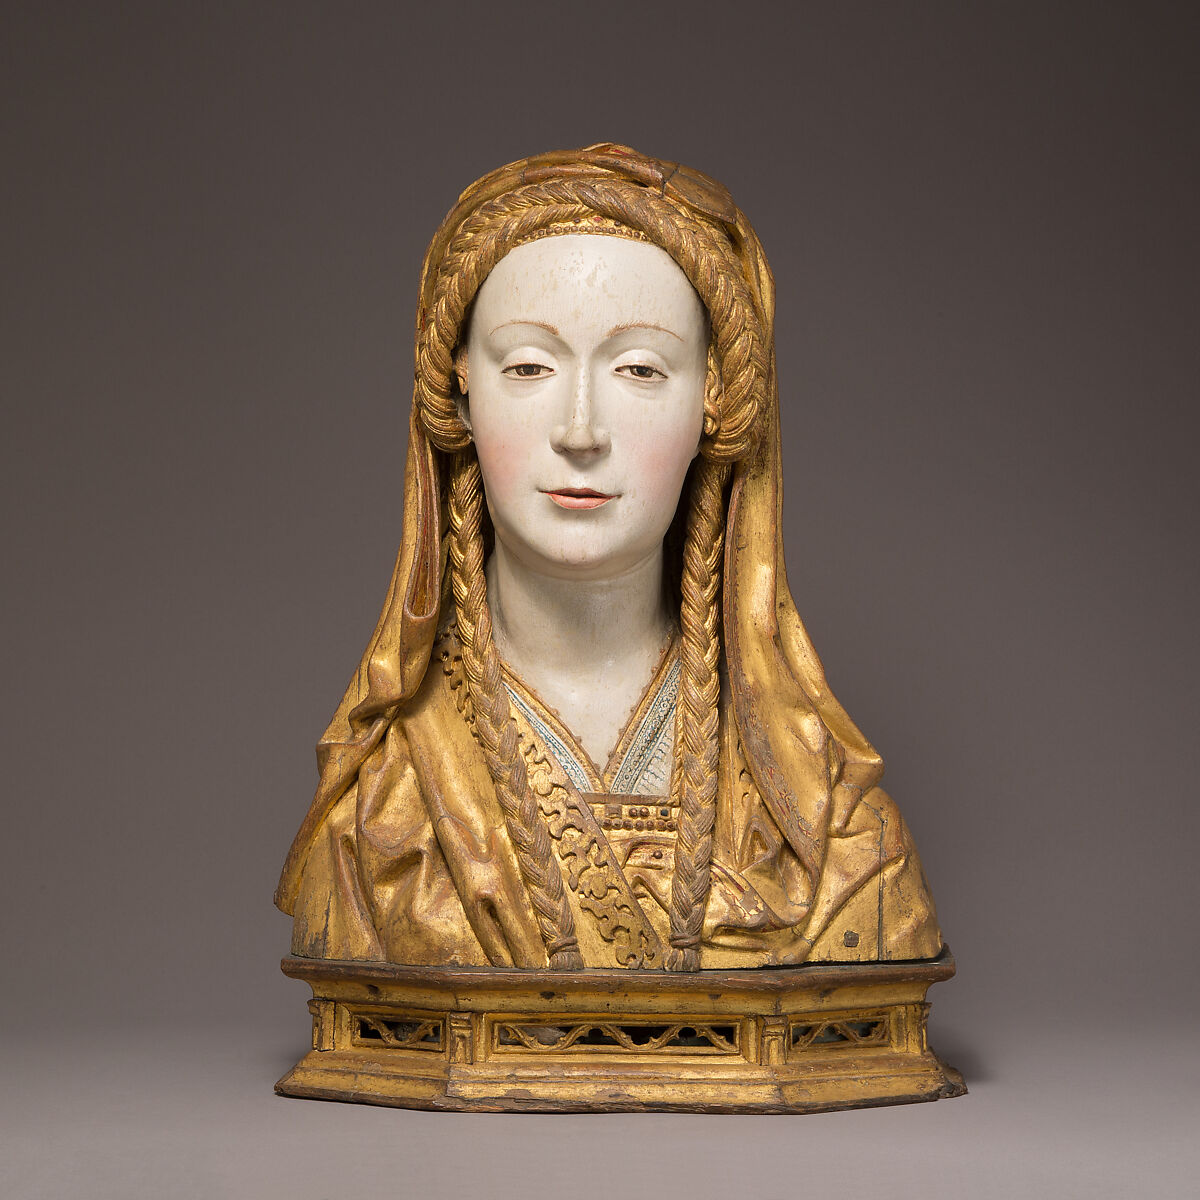 Reliquary Bust of a Female Saint, Oak, painted and gilded, and human remains, South Netherlandish 